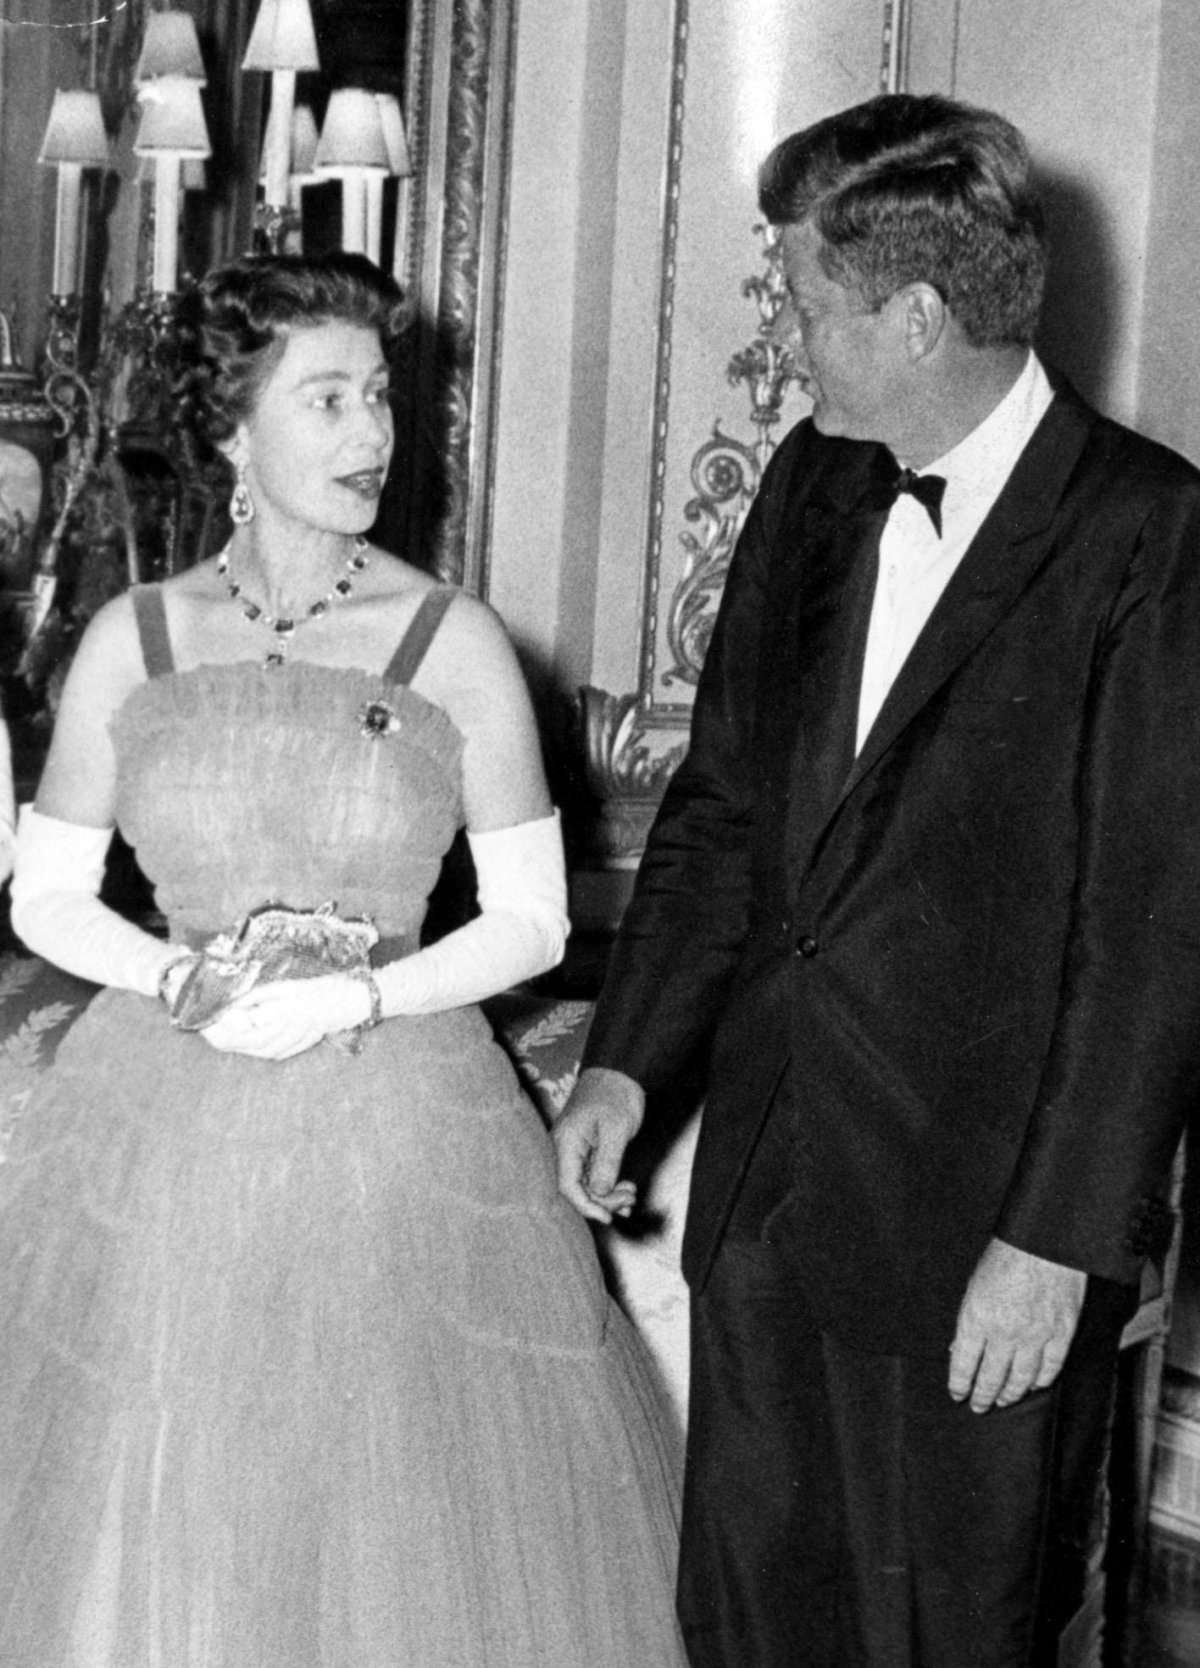 Queen Elizabeth II and President John F. Kennedy are pictured ahead of a dinner at Buckingham Palace in London on June 5, 1961 (Keystone Press/Alamy)